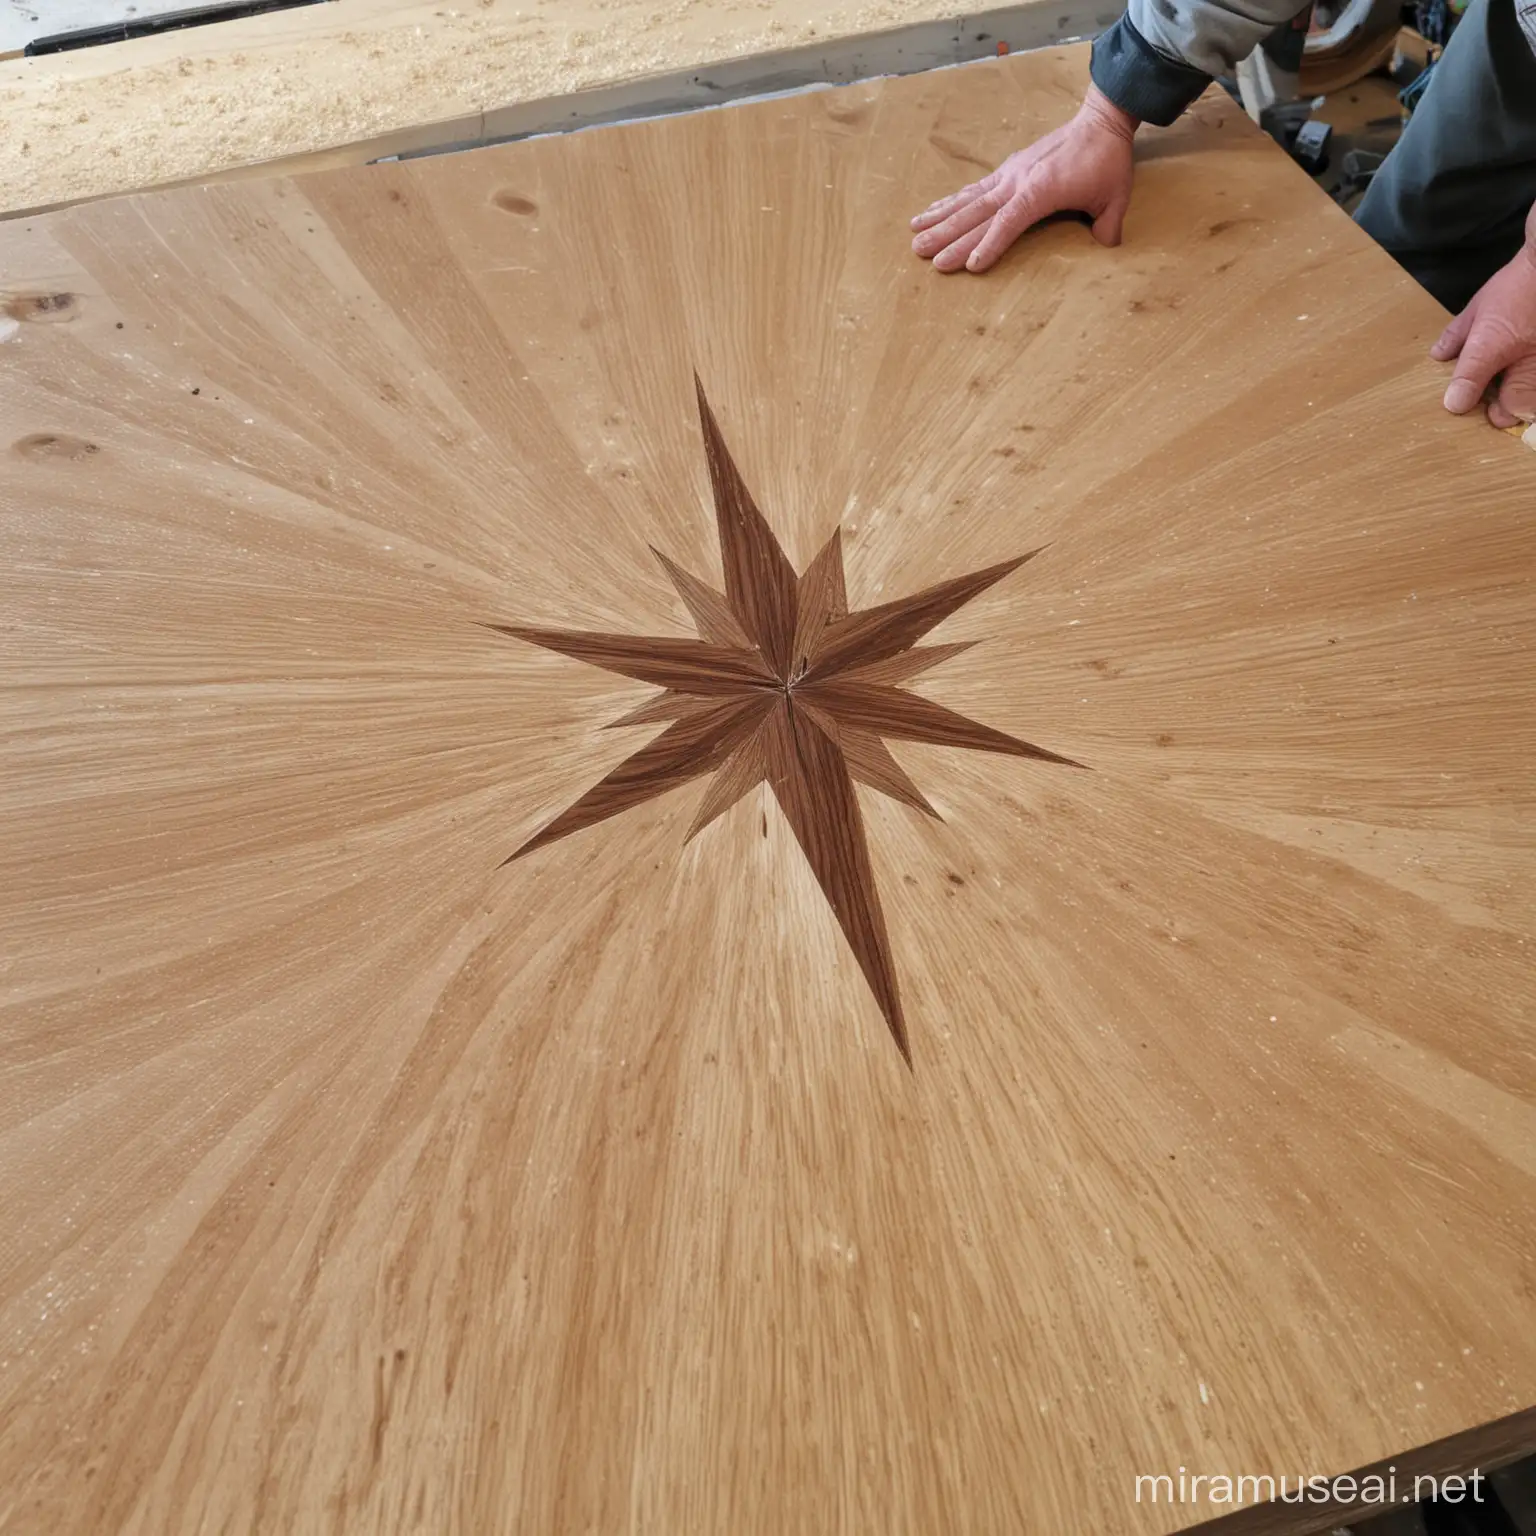 shinny north star on top a carpentry. wood everywhere. milling. hands working.